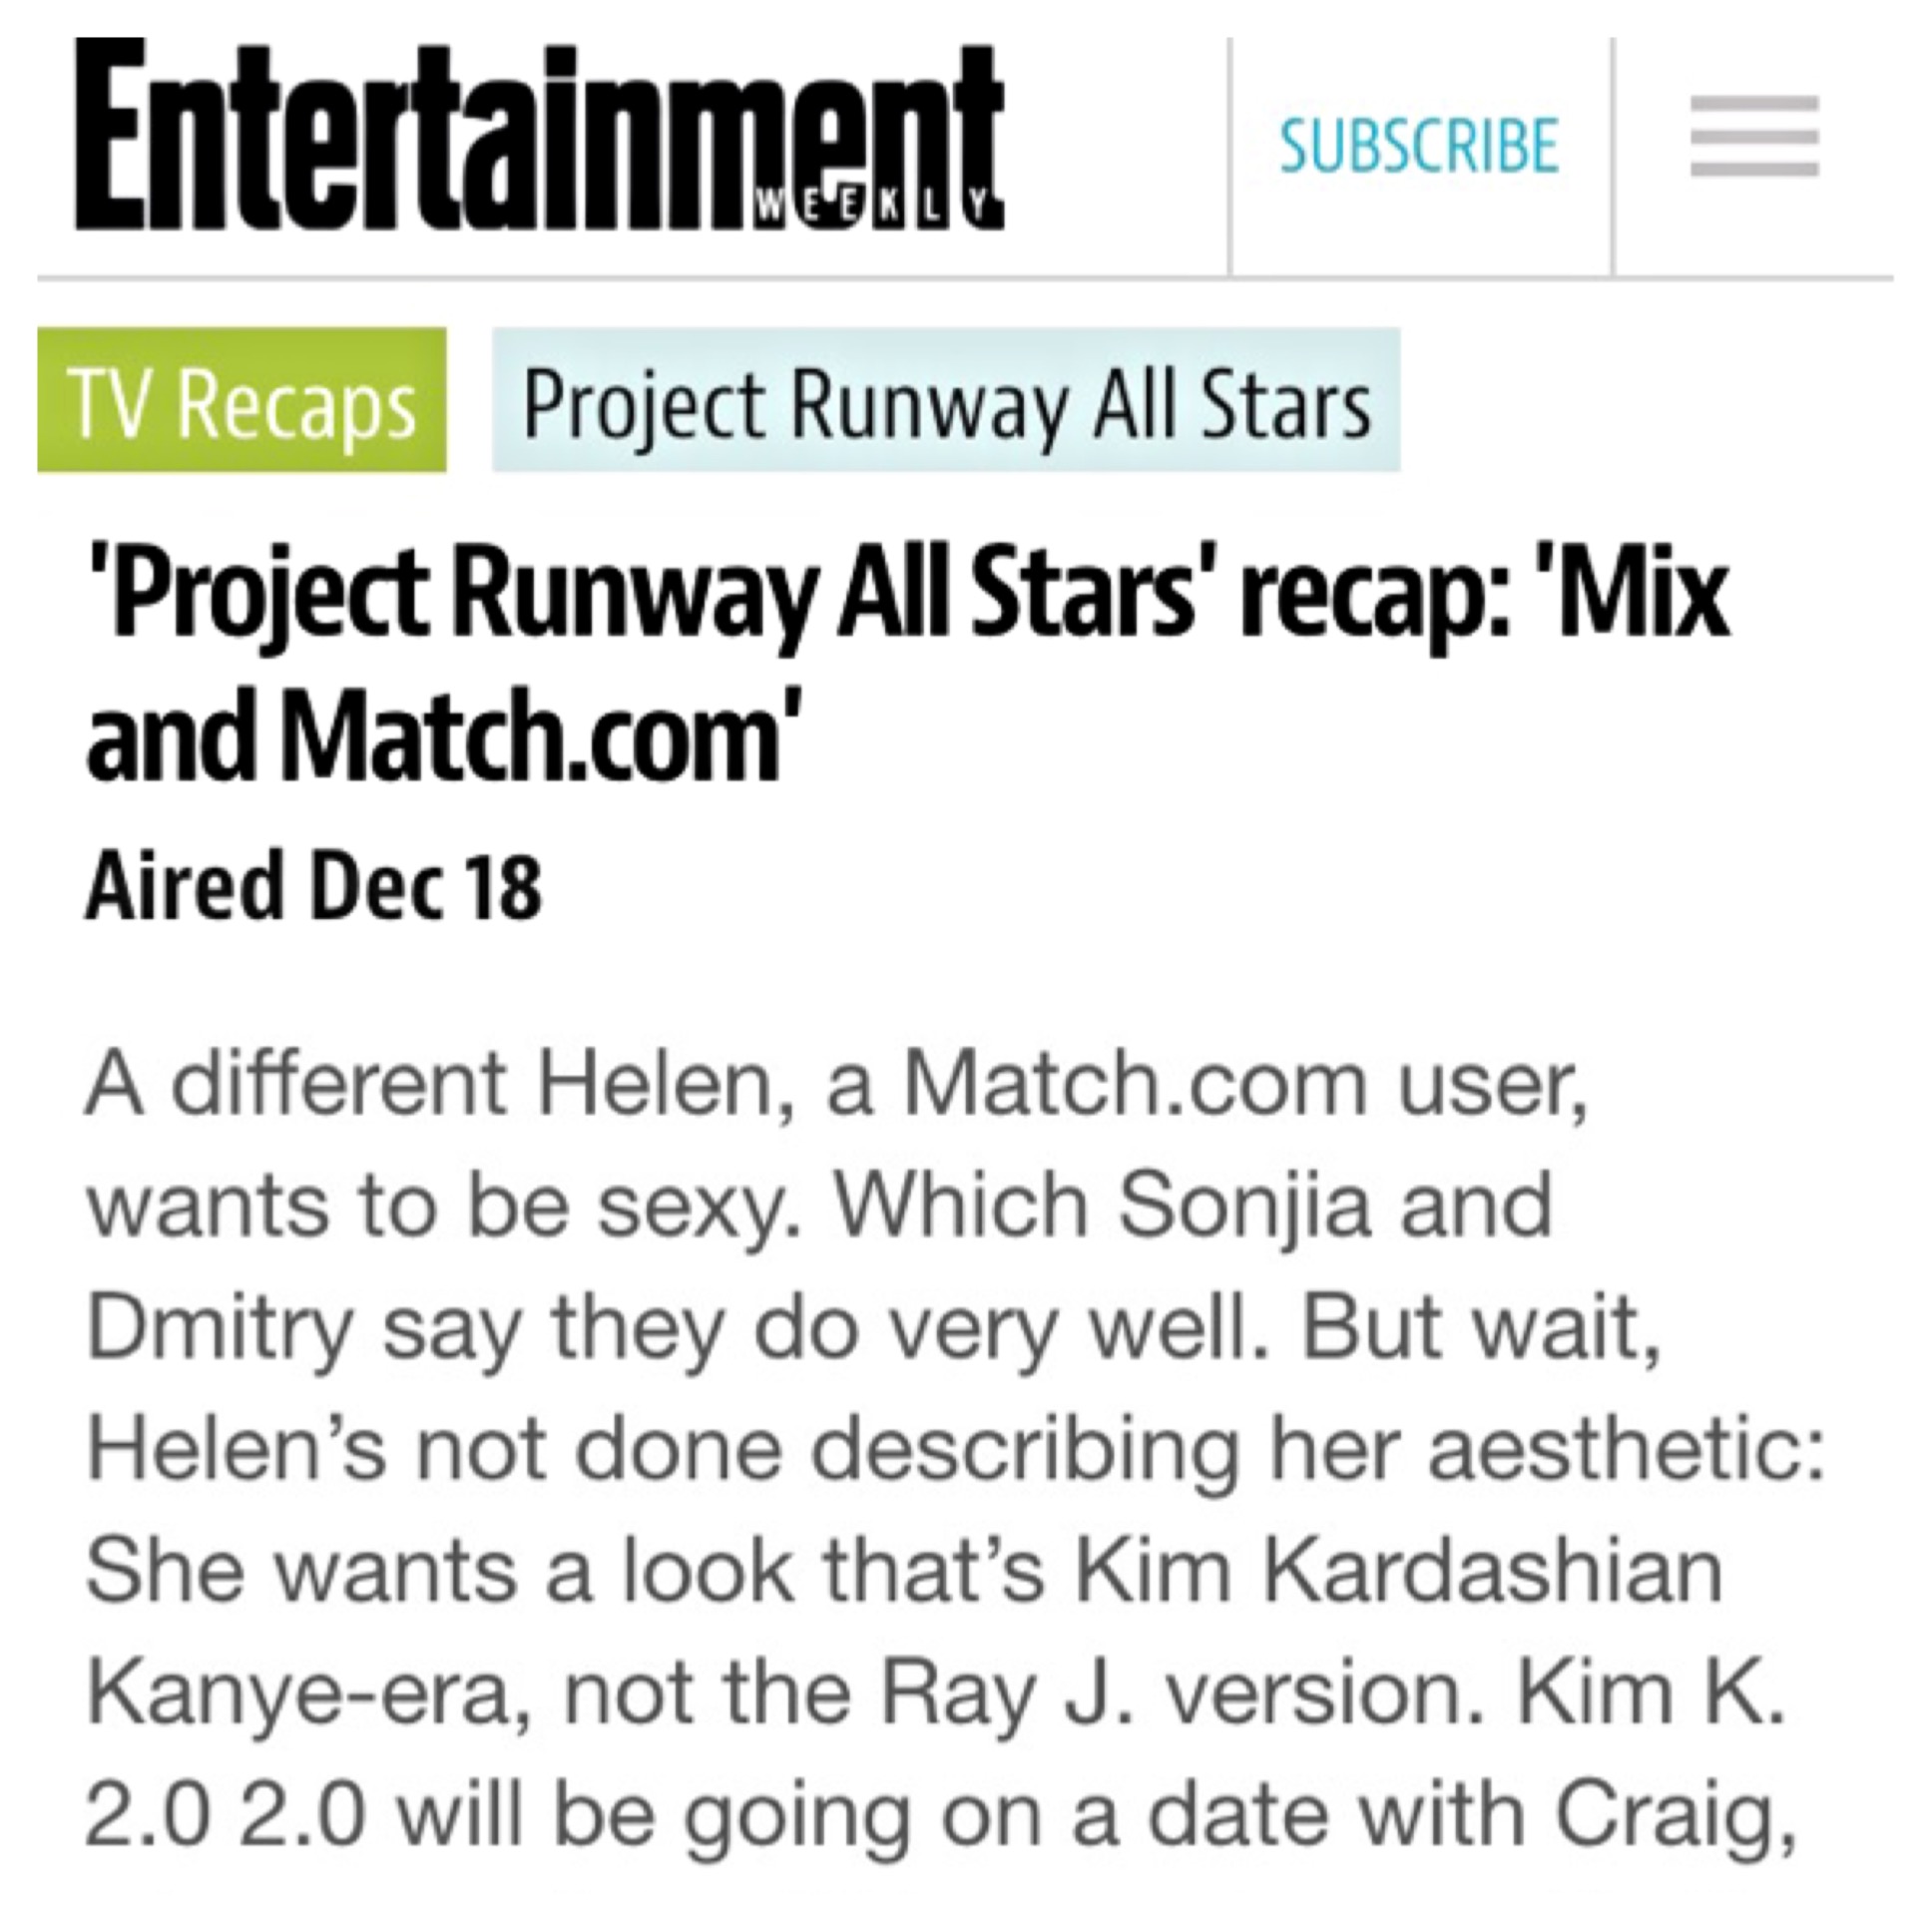 Kim K 2.0? Well I've been call worse...thanks Entertainment Weekly!